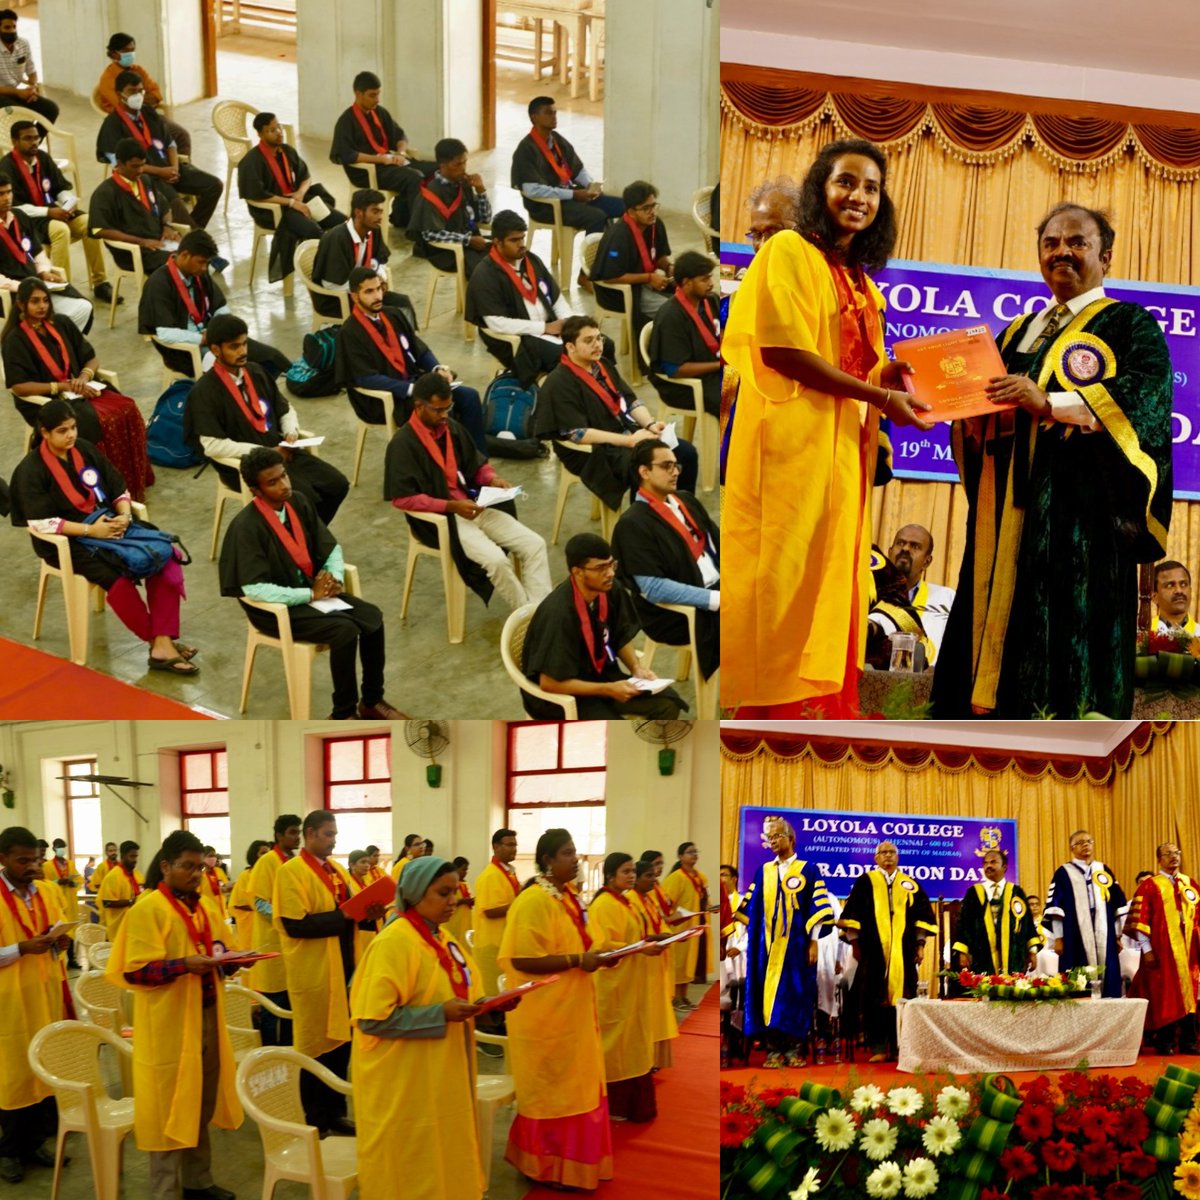 Loyola College 93rd Graduation ceremony, 19th March 2022 Chief guest: Dr. S. Gowri, Vice-chancellor, University of Madras, Chennai . @lcchennai